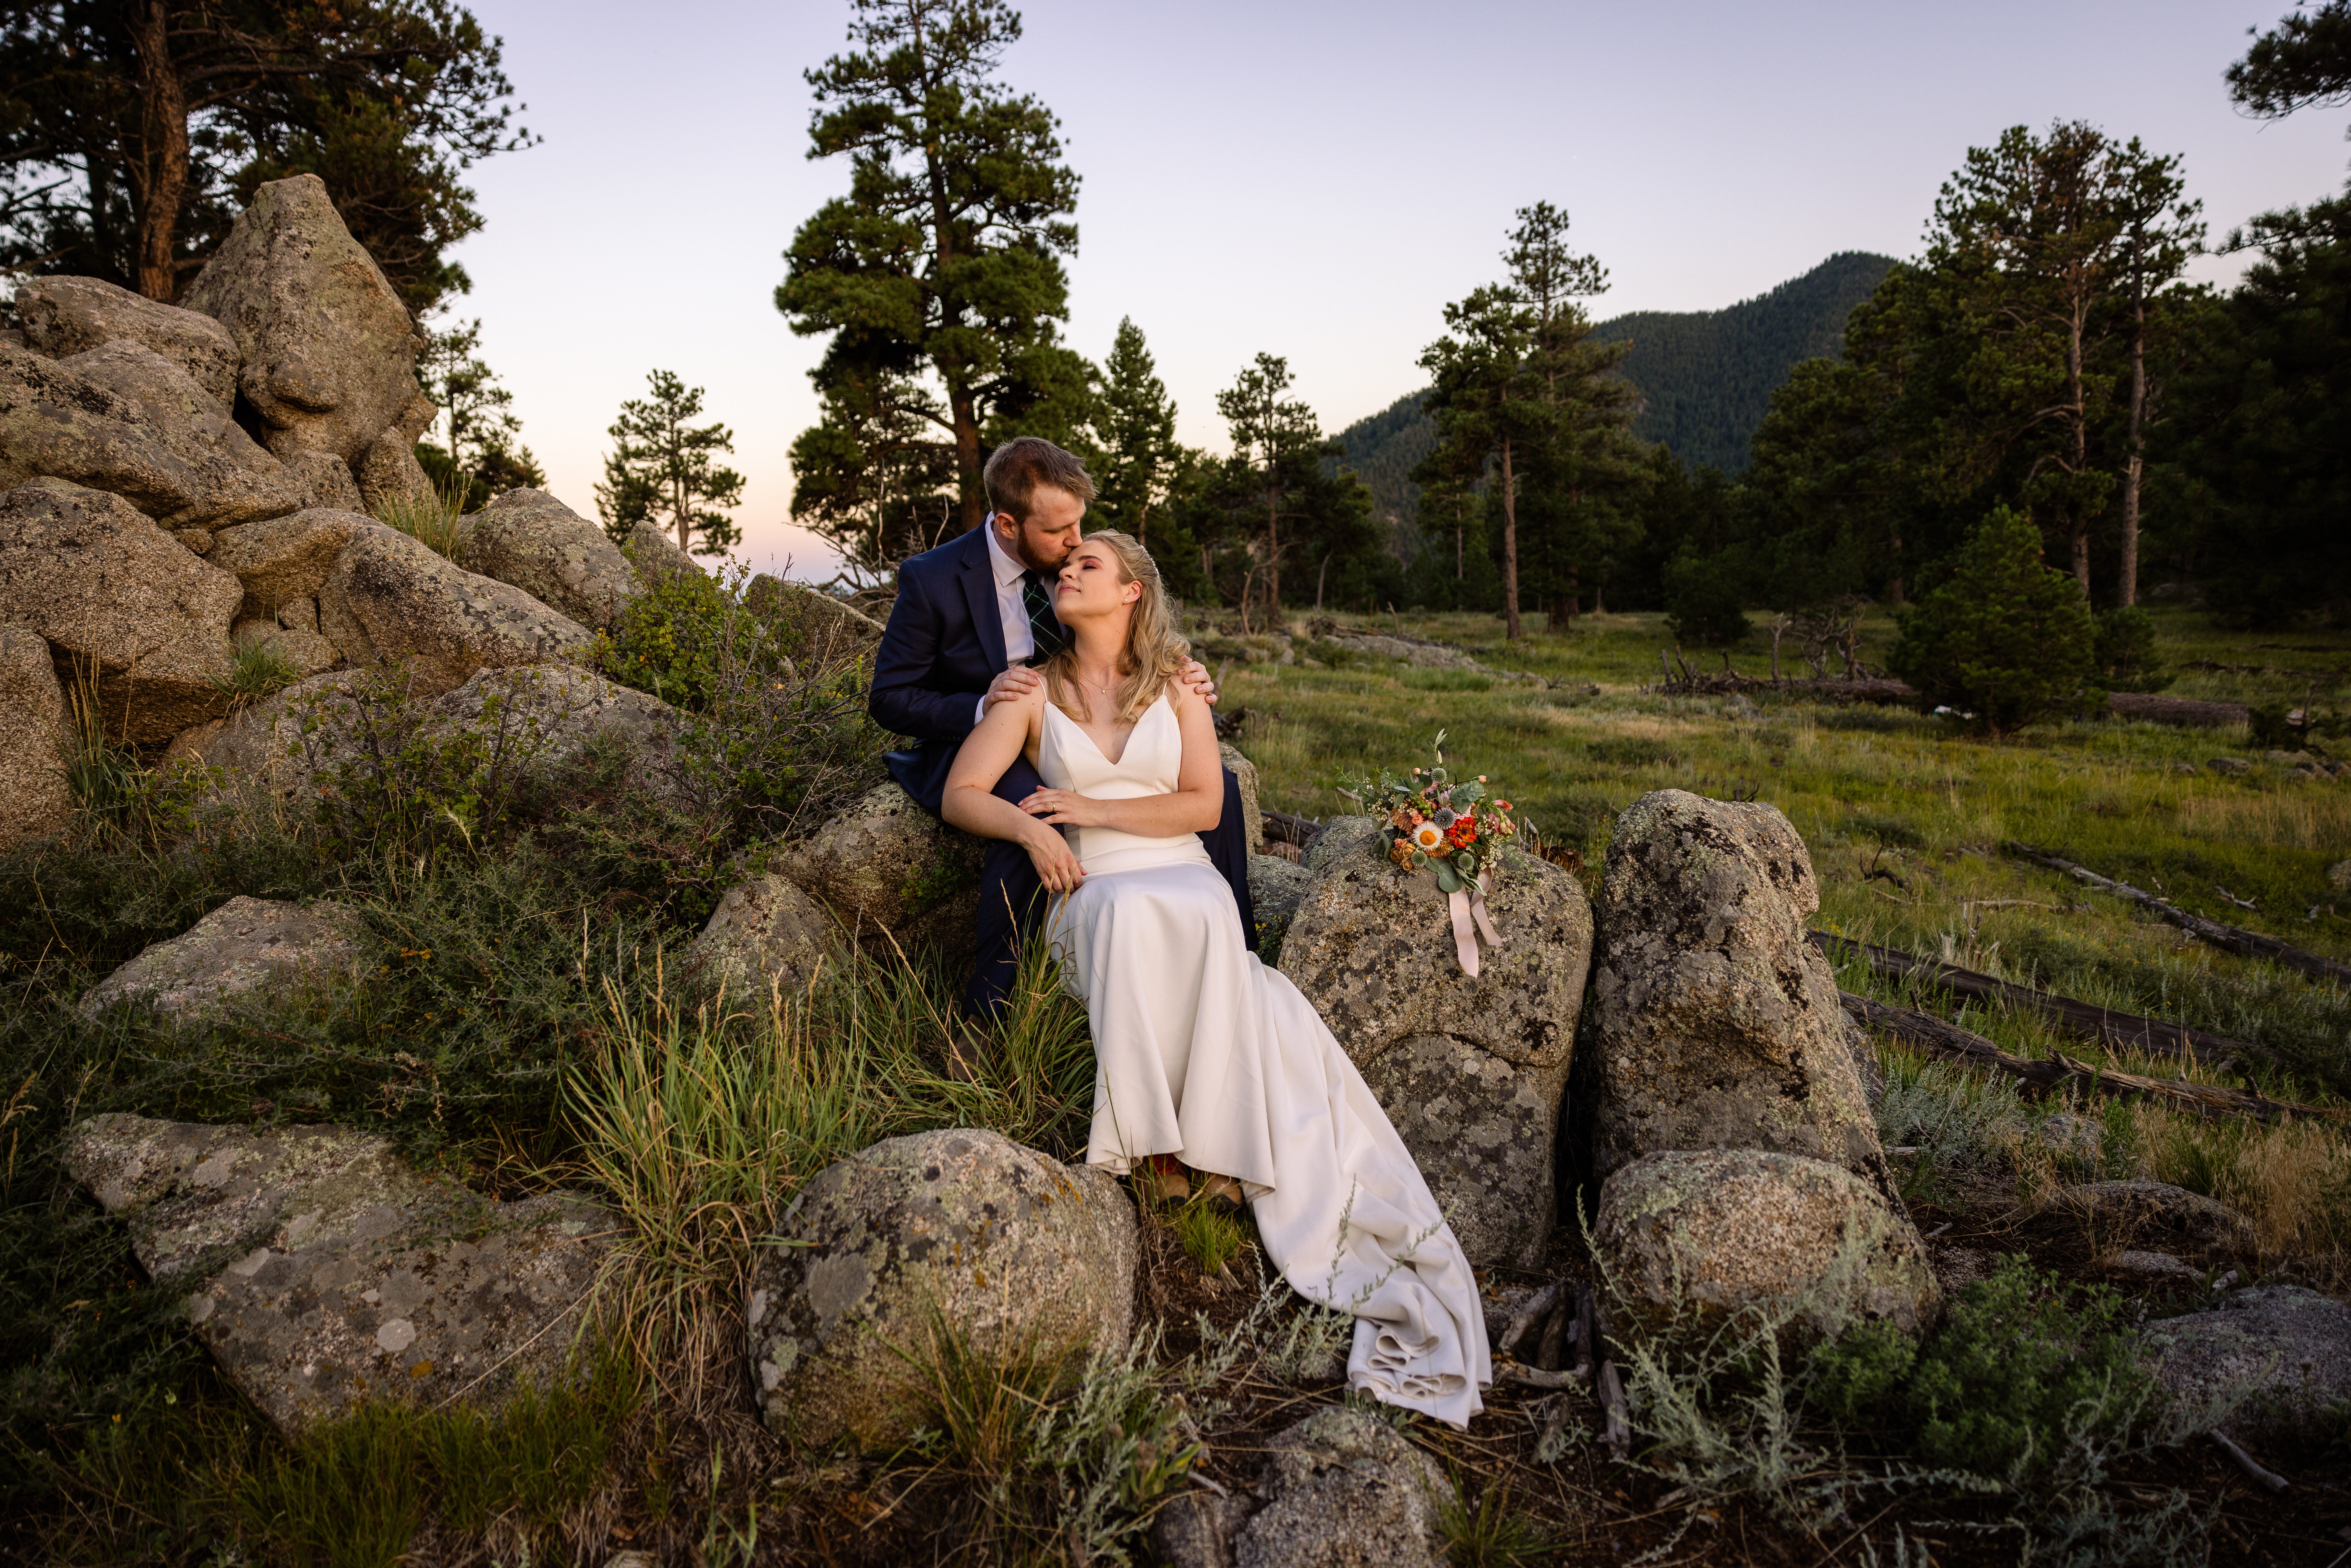 The groom kissing his bride on the forehead while they sit on a rock at sunset after their Sunrise Amphitheater wedding.